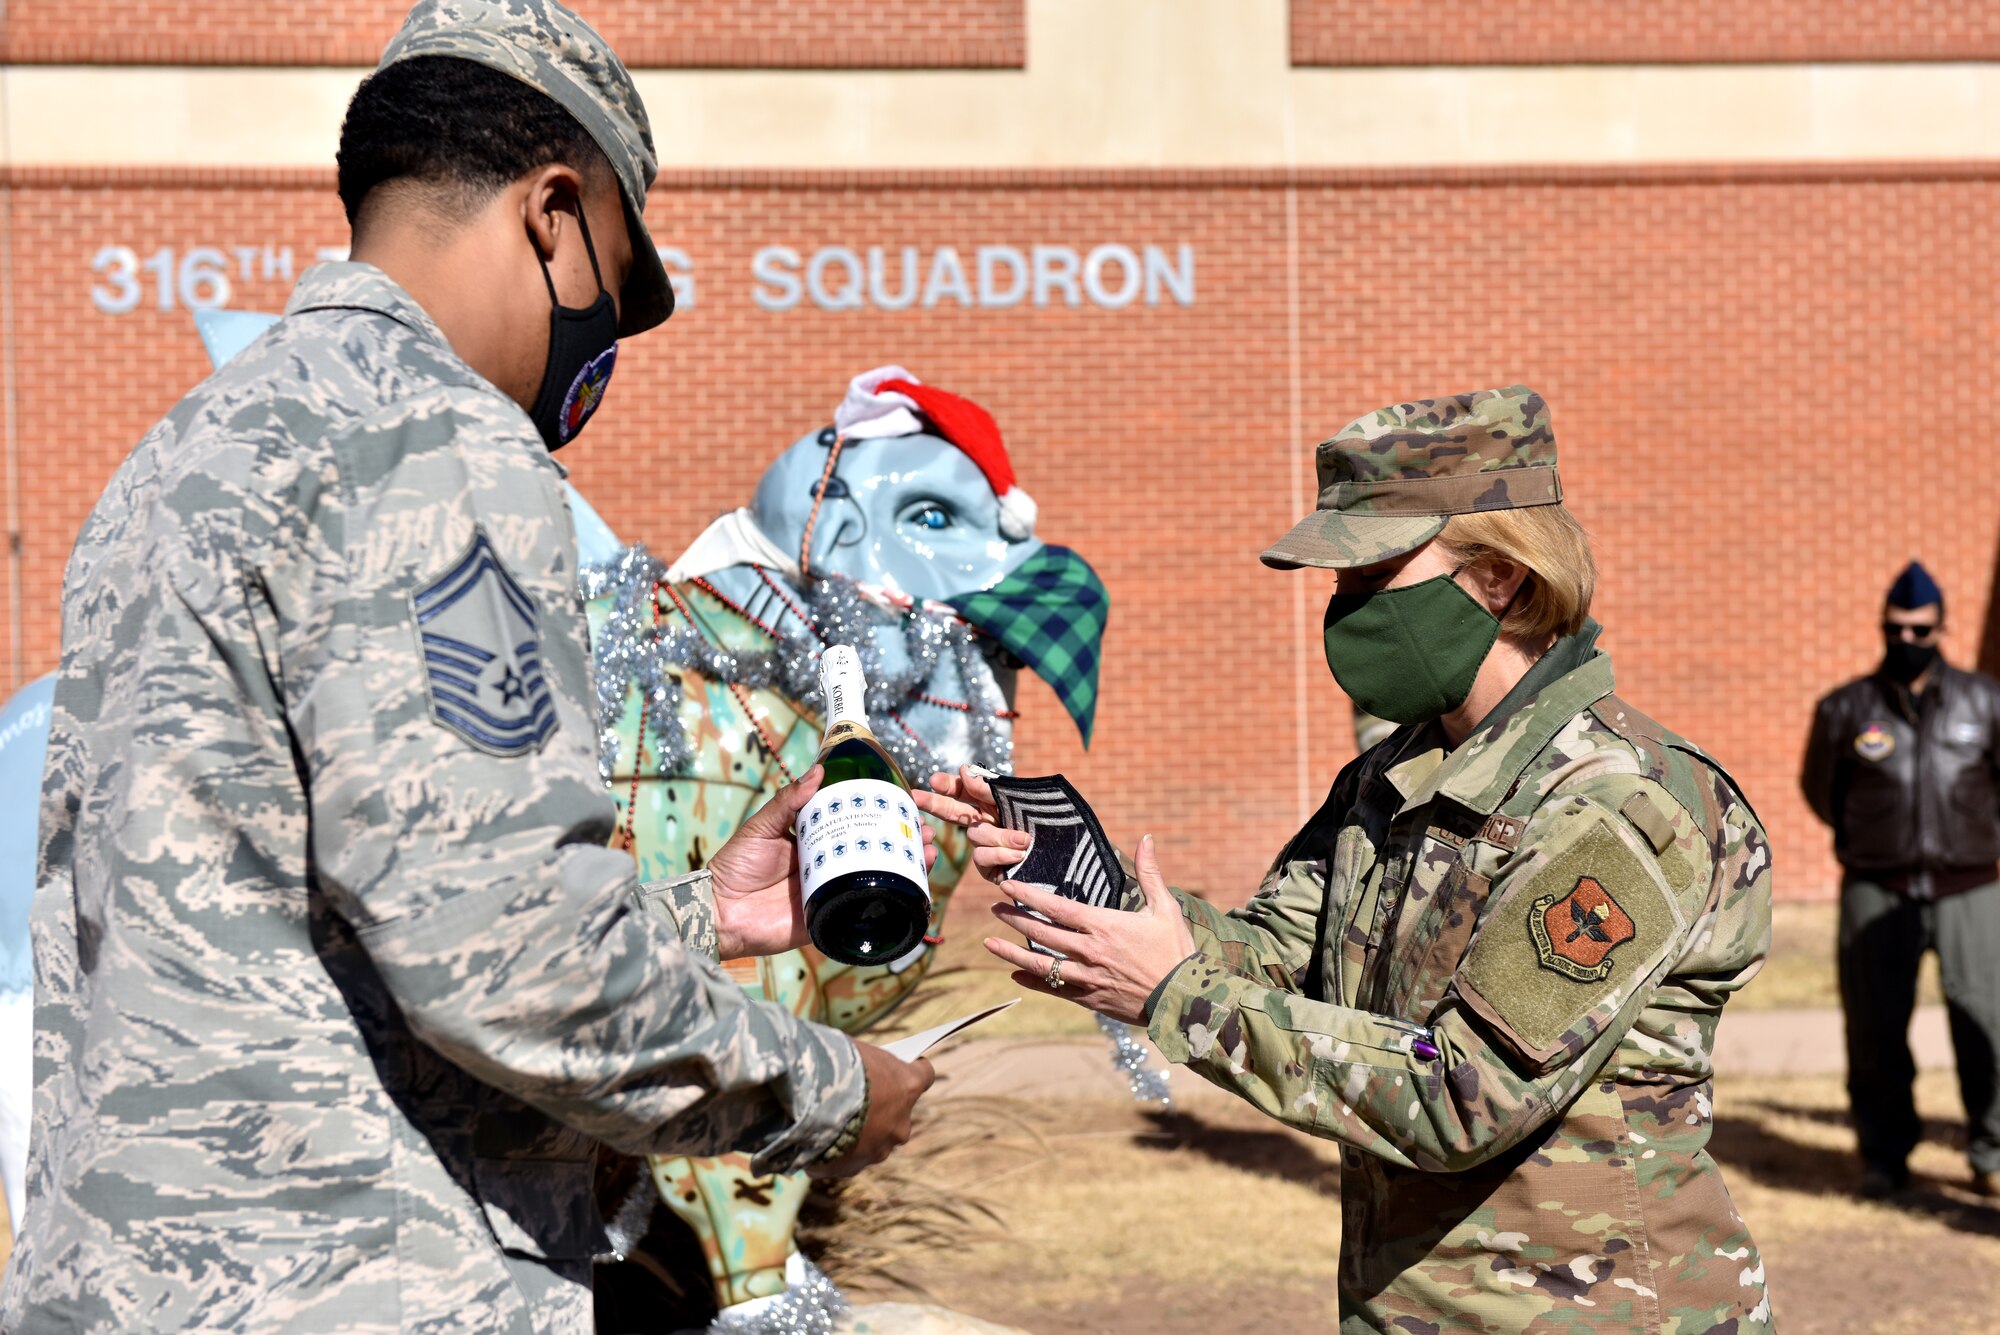 U.S. Air Force Chief Master Sgt. Casy Boomershine, 17th Training Wing command chief, presents Chief Master Sgt. select Aaron Shirley, 316th Training Squadron superintendent, with a gift commemorating earning his stripe in front of the 316th TRS on Goodfellow Air Force Base, Texas, Dec. 4, 2020. Less than 1 percent of enlisted are selected to become chief master sergeants. (U.S. Air Force photo by Staff Sgt. Seraiah Wolf)